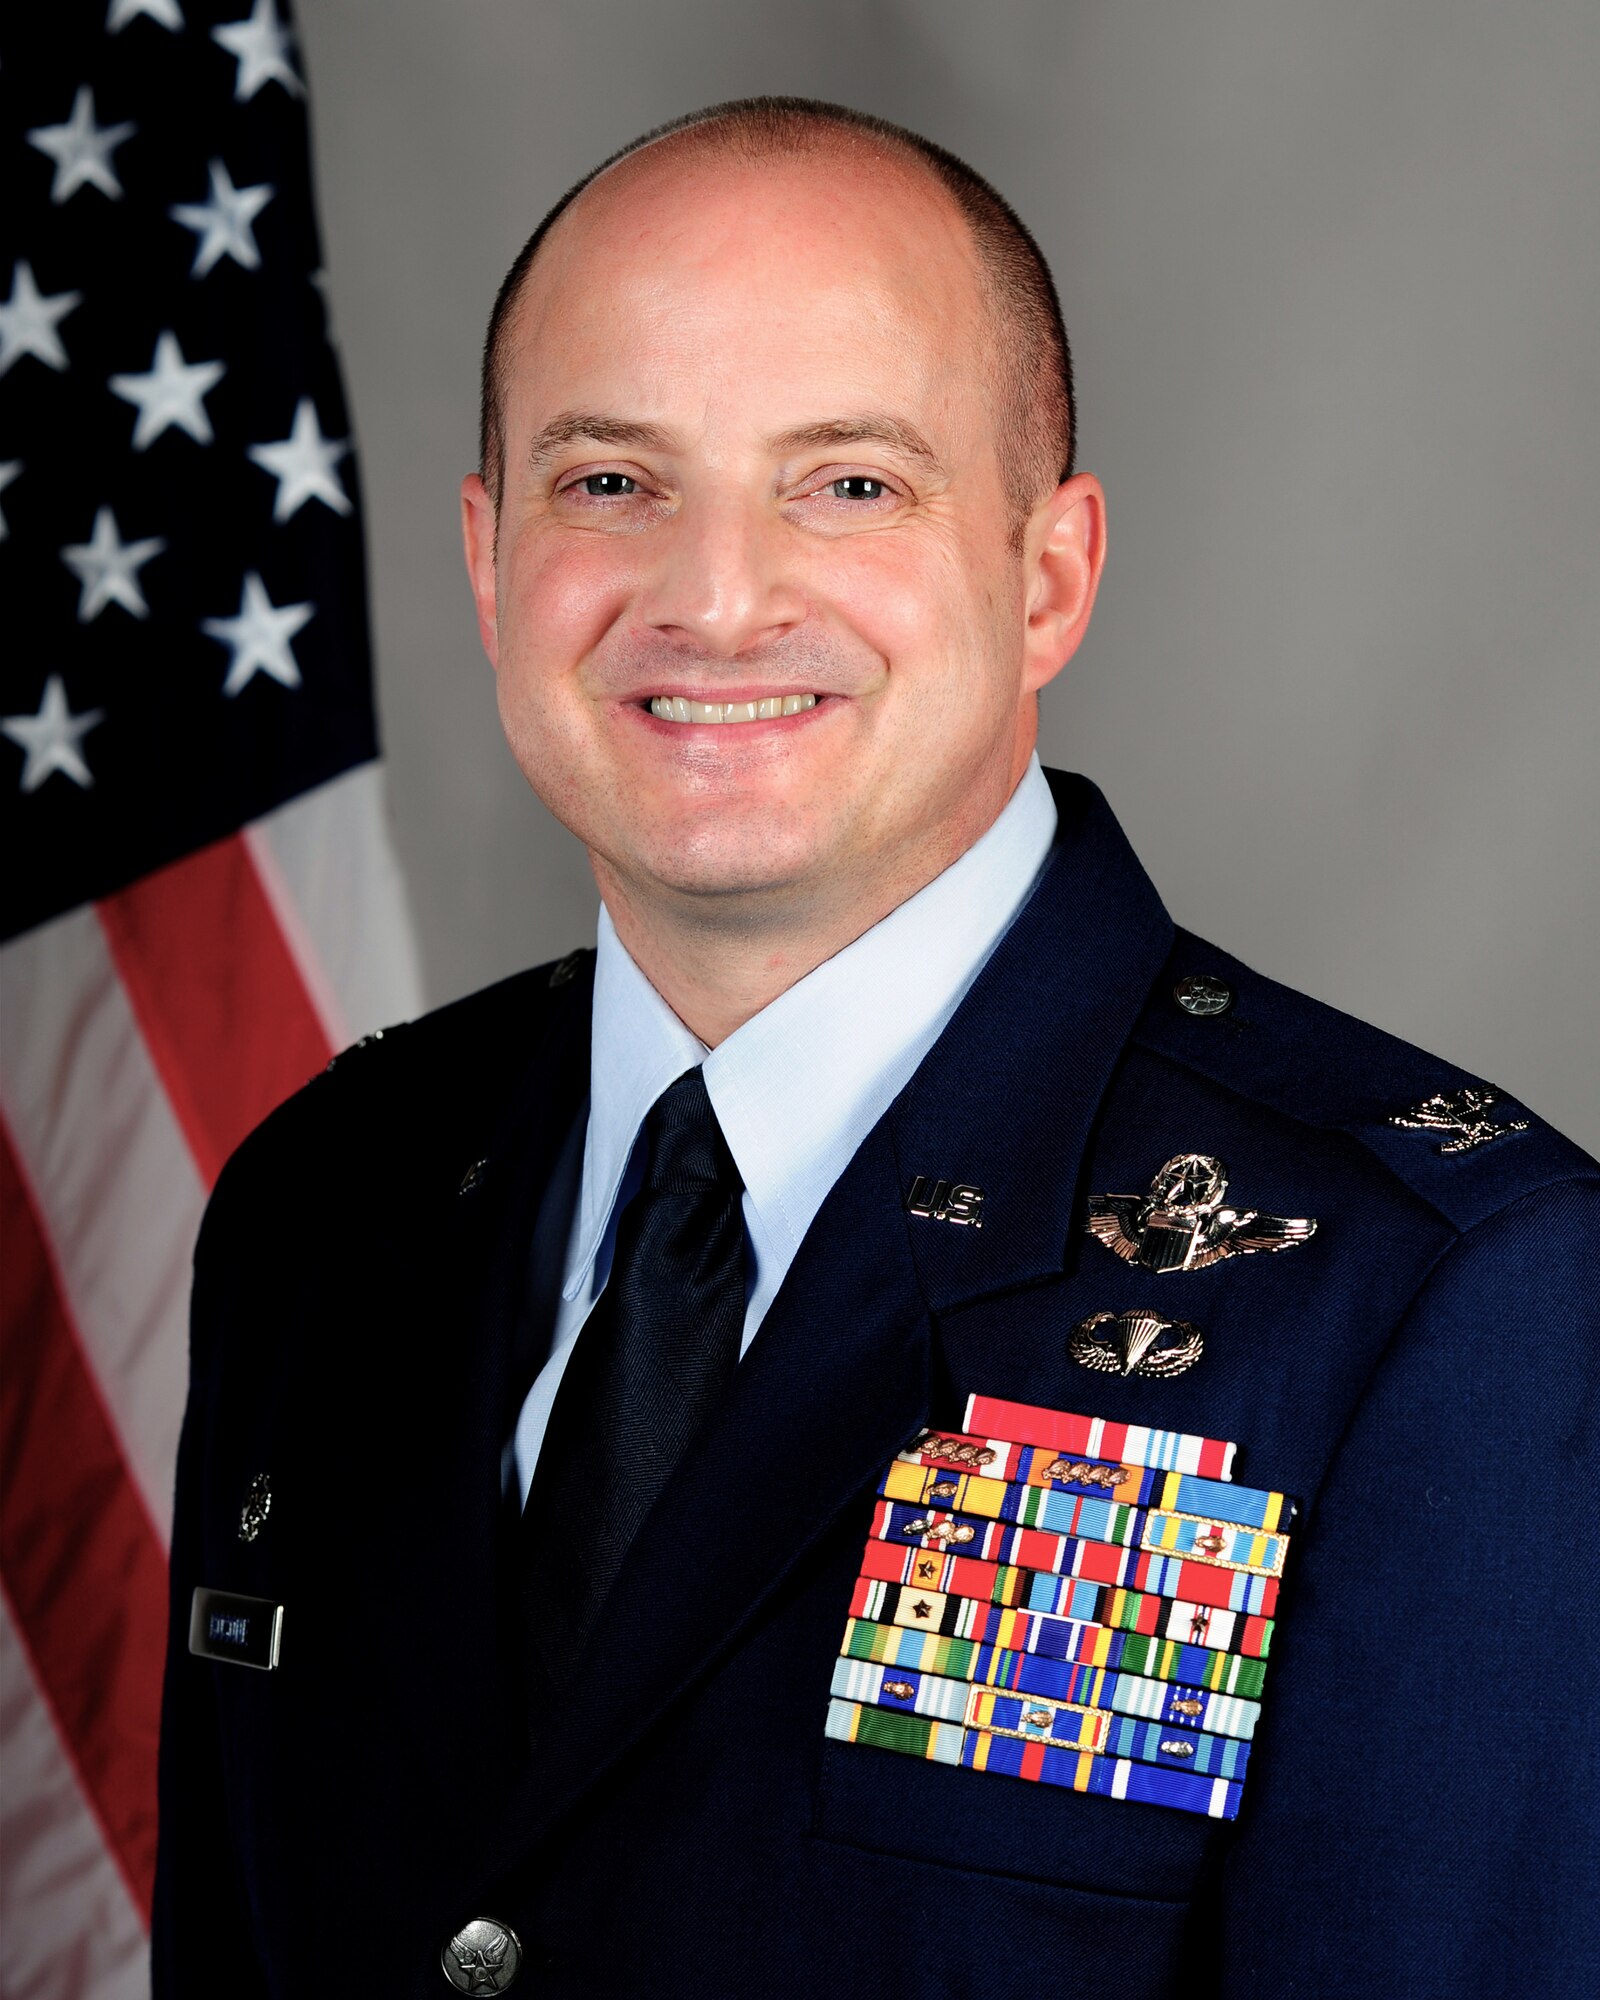 Colonel John W. Bosone, 8th Fighter Wing commander, took an official photo at Kunsan Air Base, Republic of Korea. He serves as the U.S. Forces Korea Area VI commander for more than 7,000 forward-stationed and combat-ready Air Force and Army personnel.